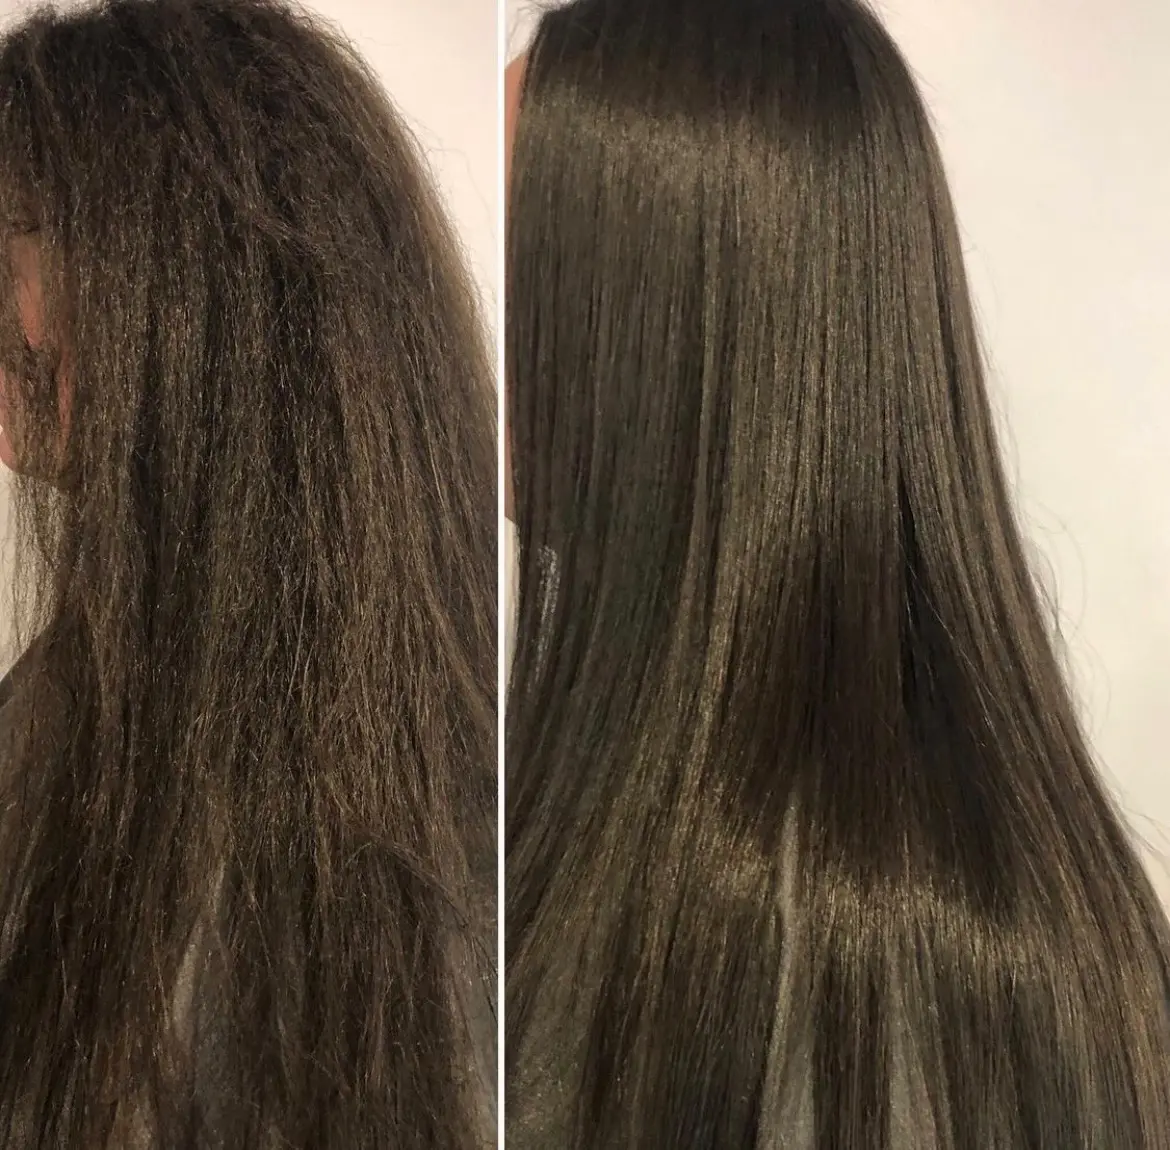 Japanese Hair Straightening before and after